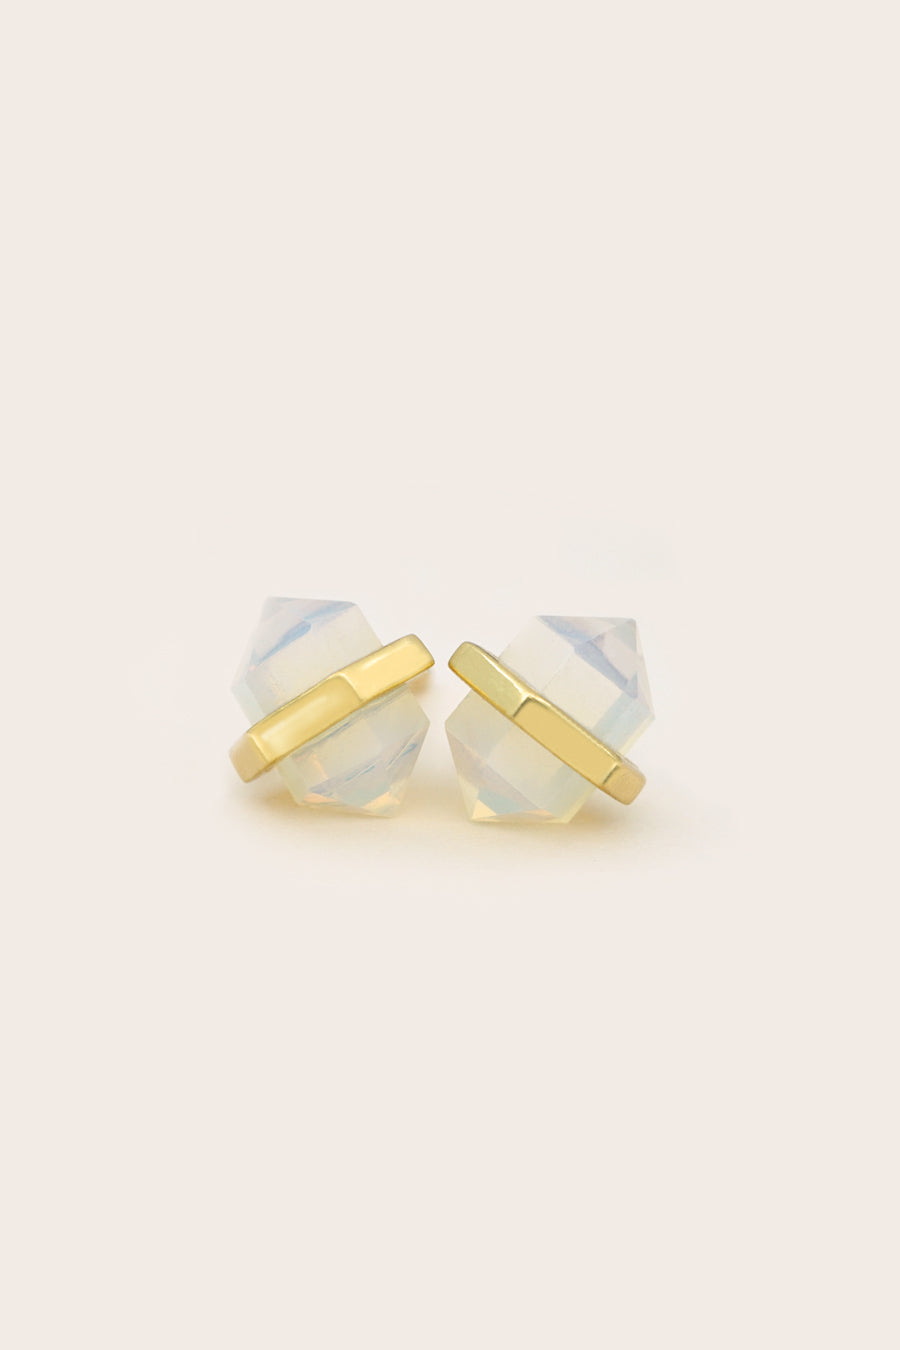 Intuition Intention Studs - Gold